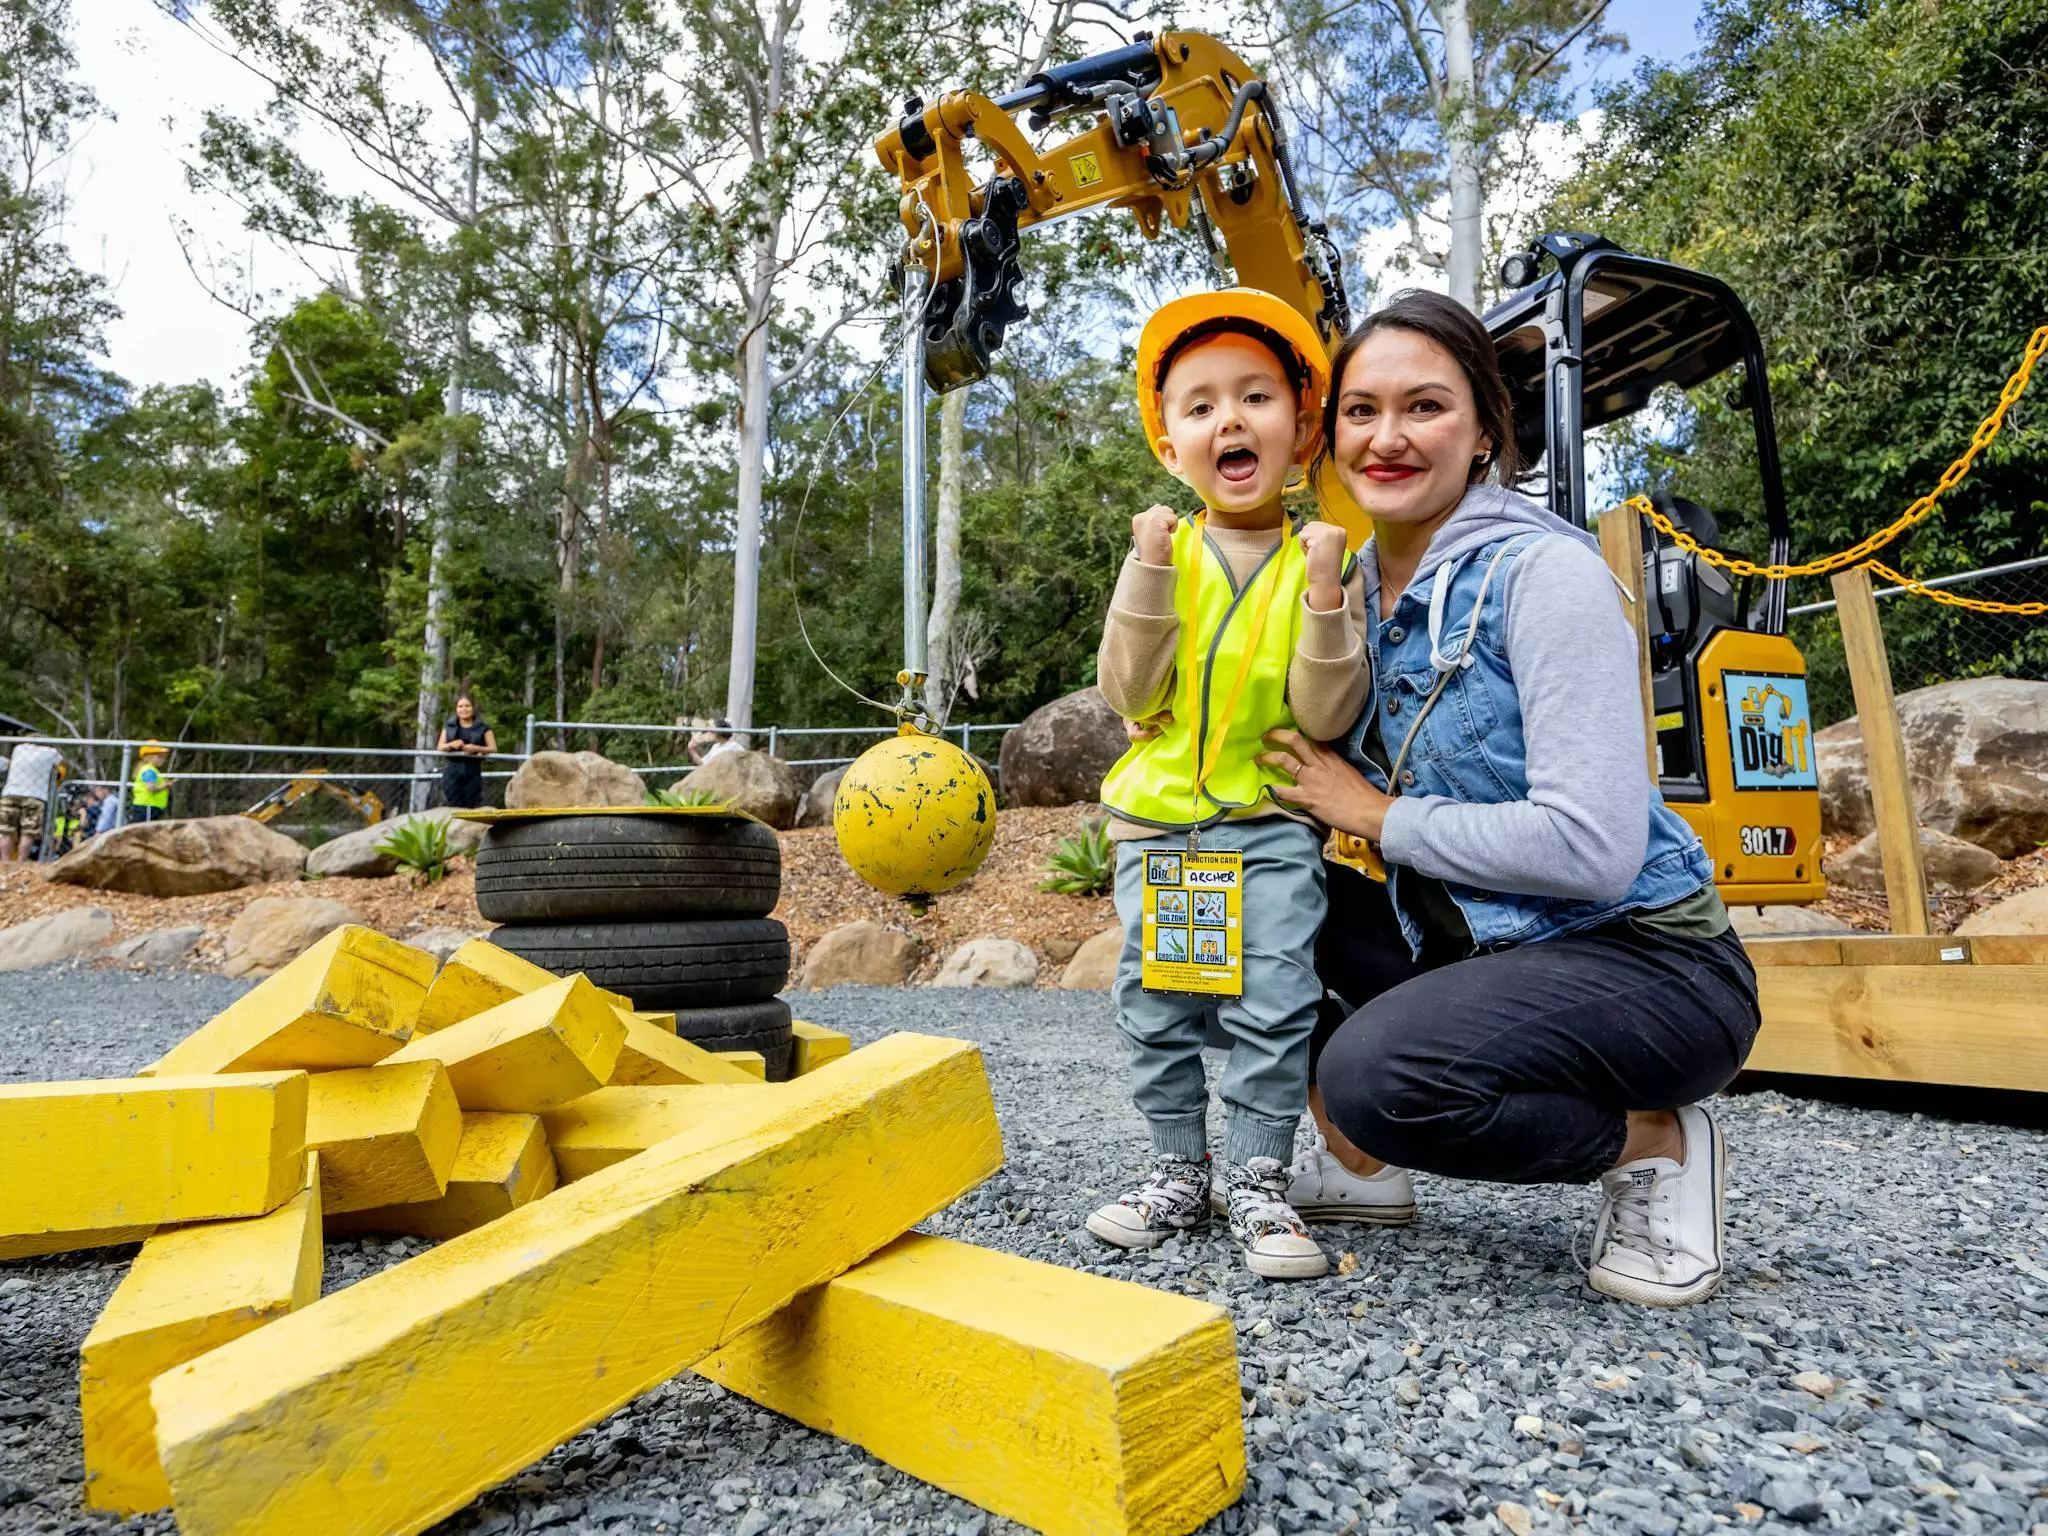 Special Offer for the June School Holidays at Dig IT!